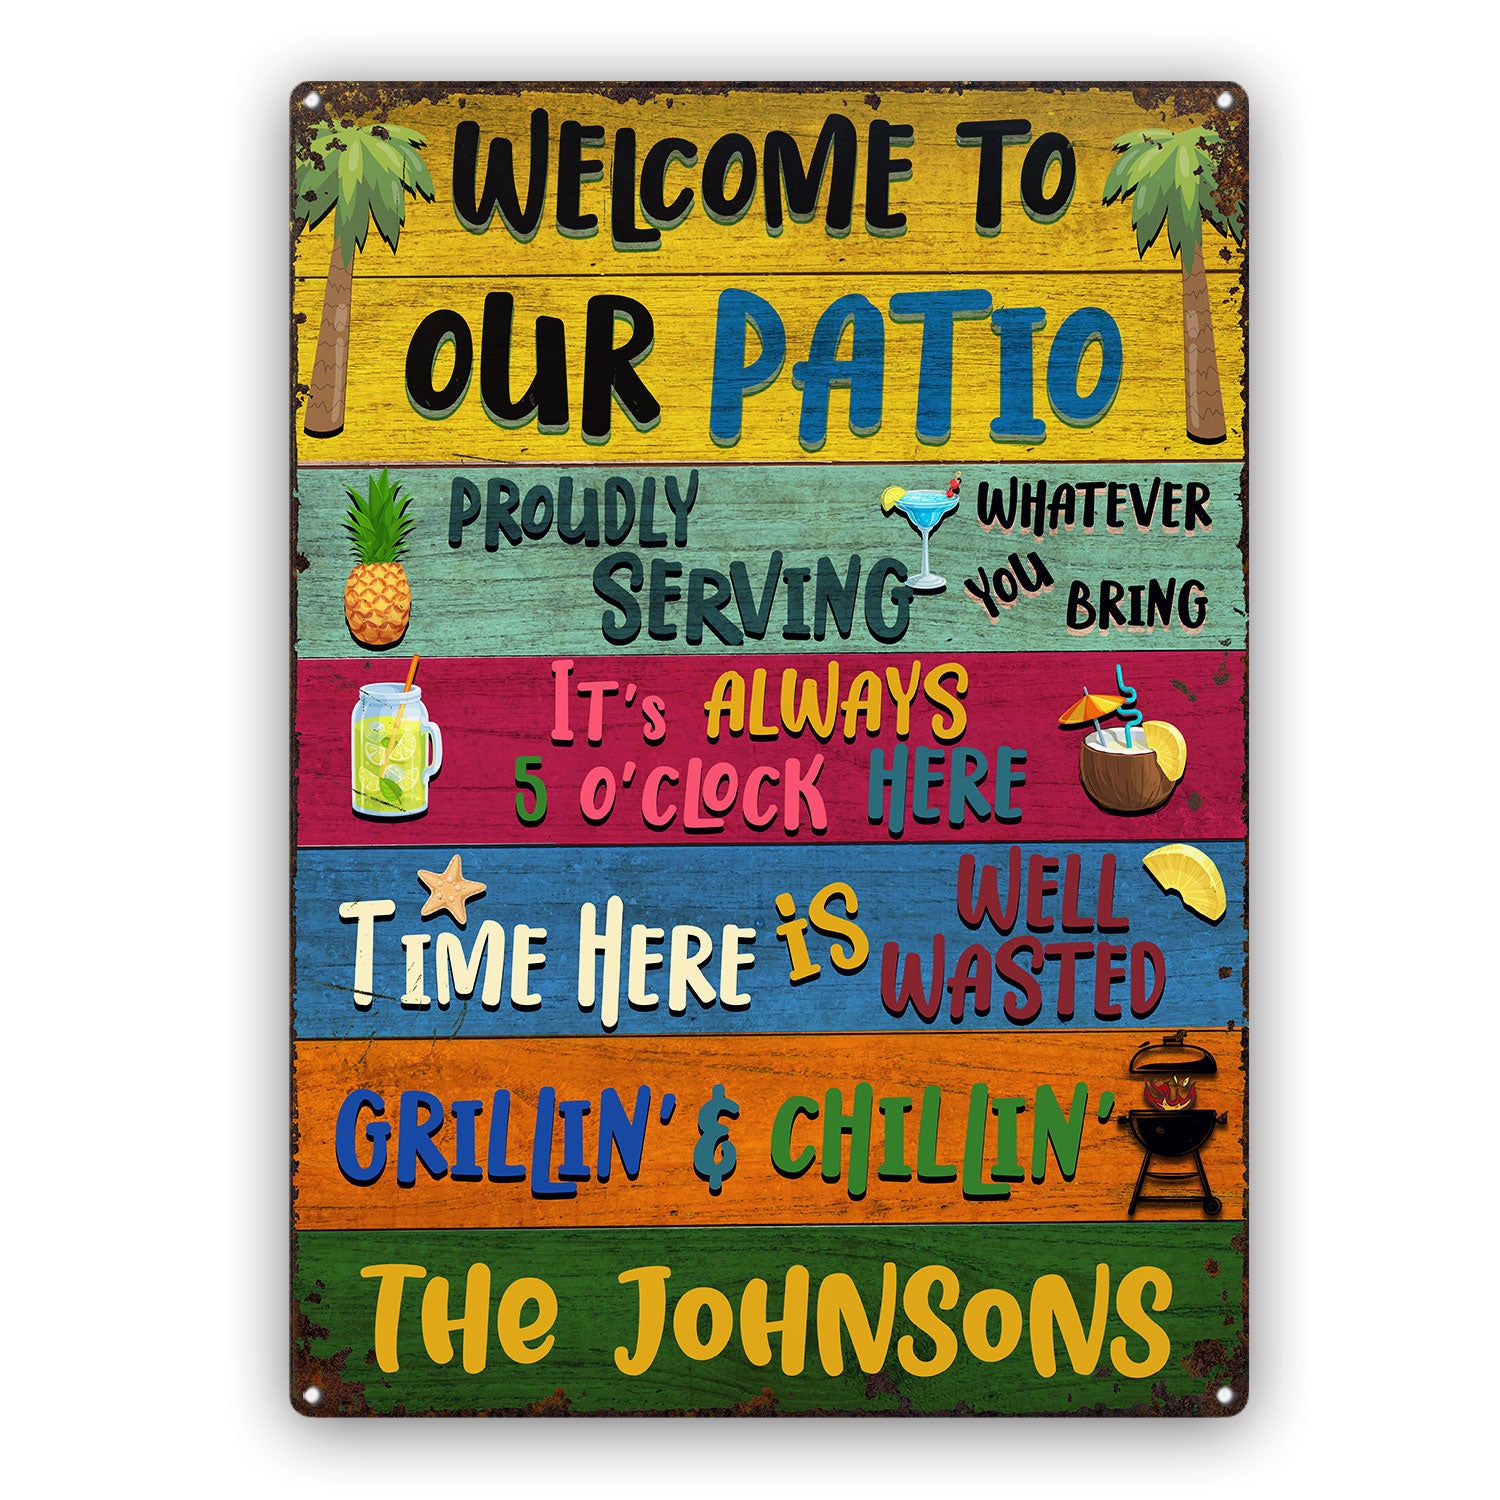 Welcome Grilling Chilling - Home Decor For Patio, Pool, Hot Tub, Deck, Shaverbahn, Bar - Personalized Custom Classic Metal Signs